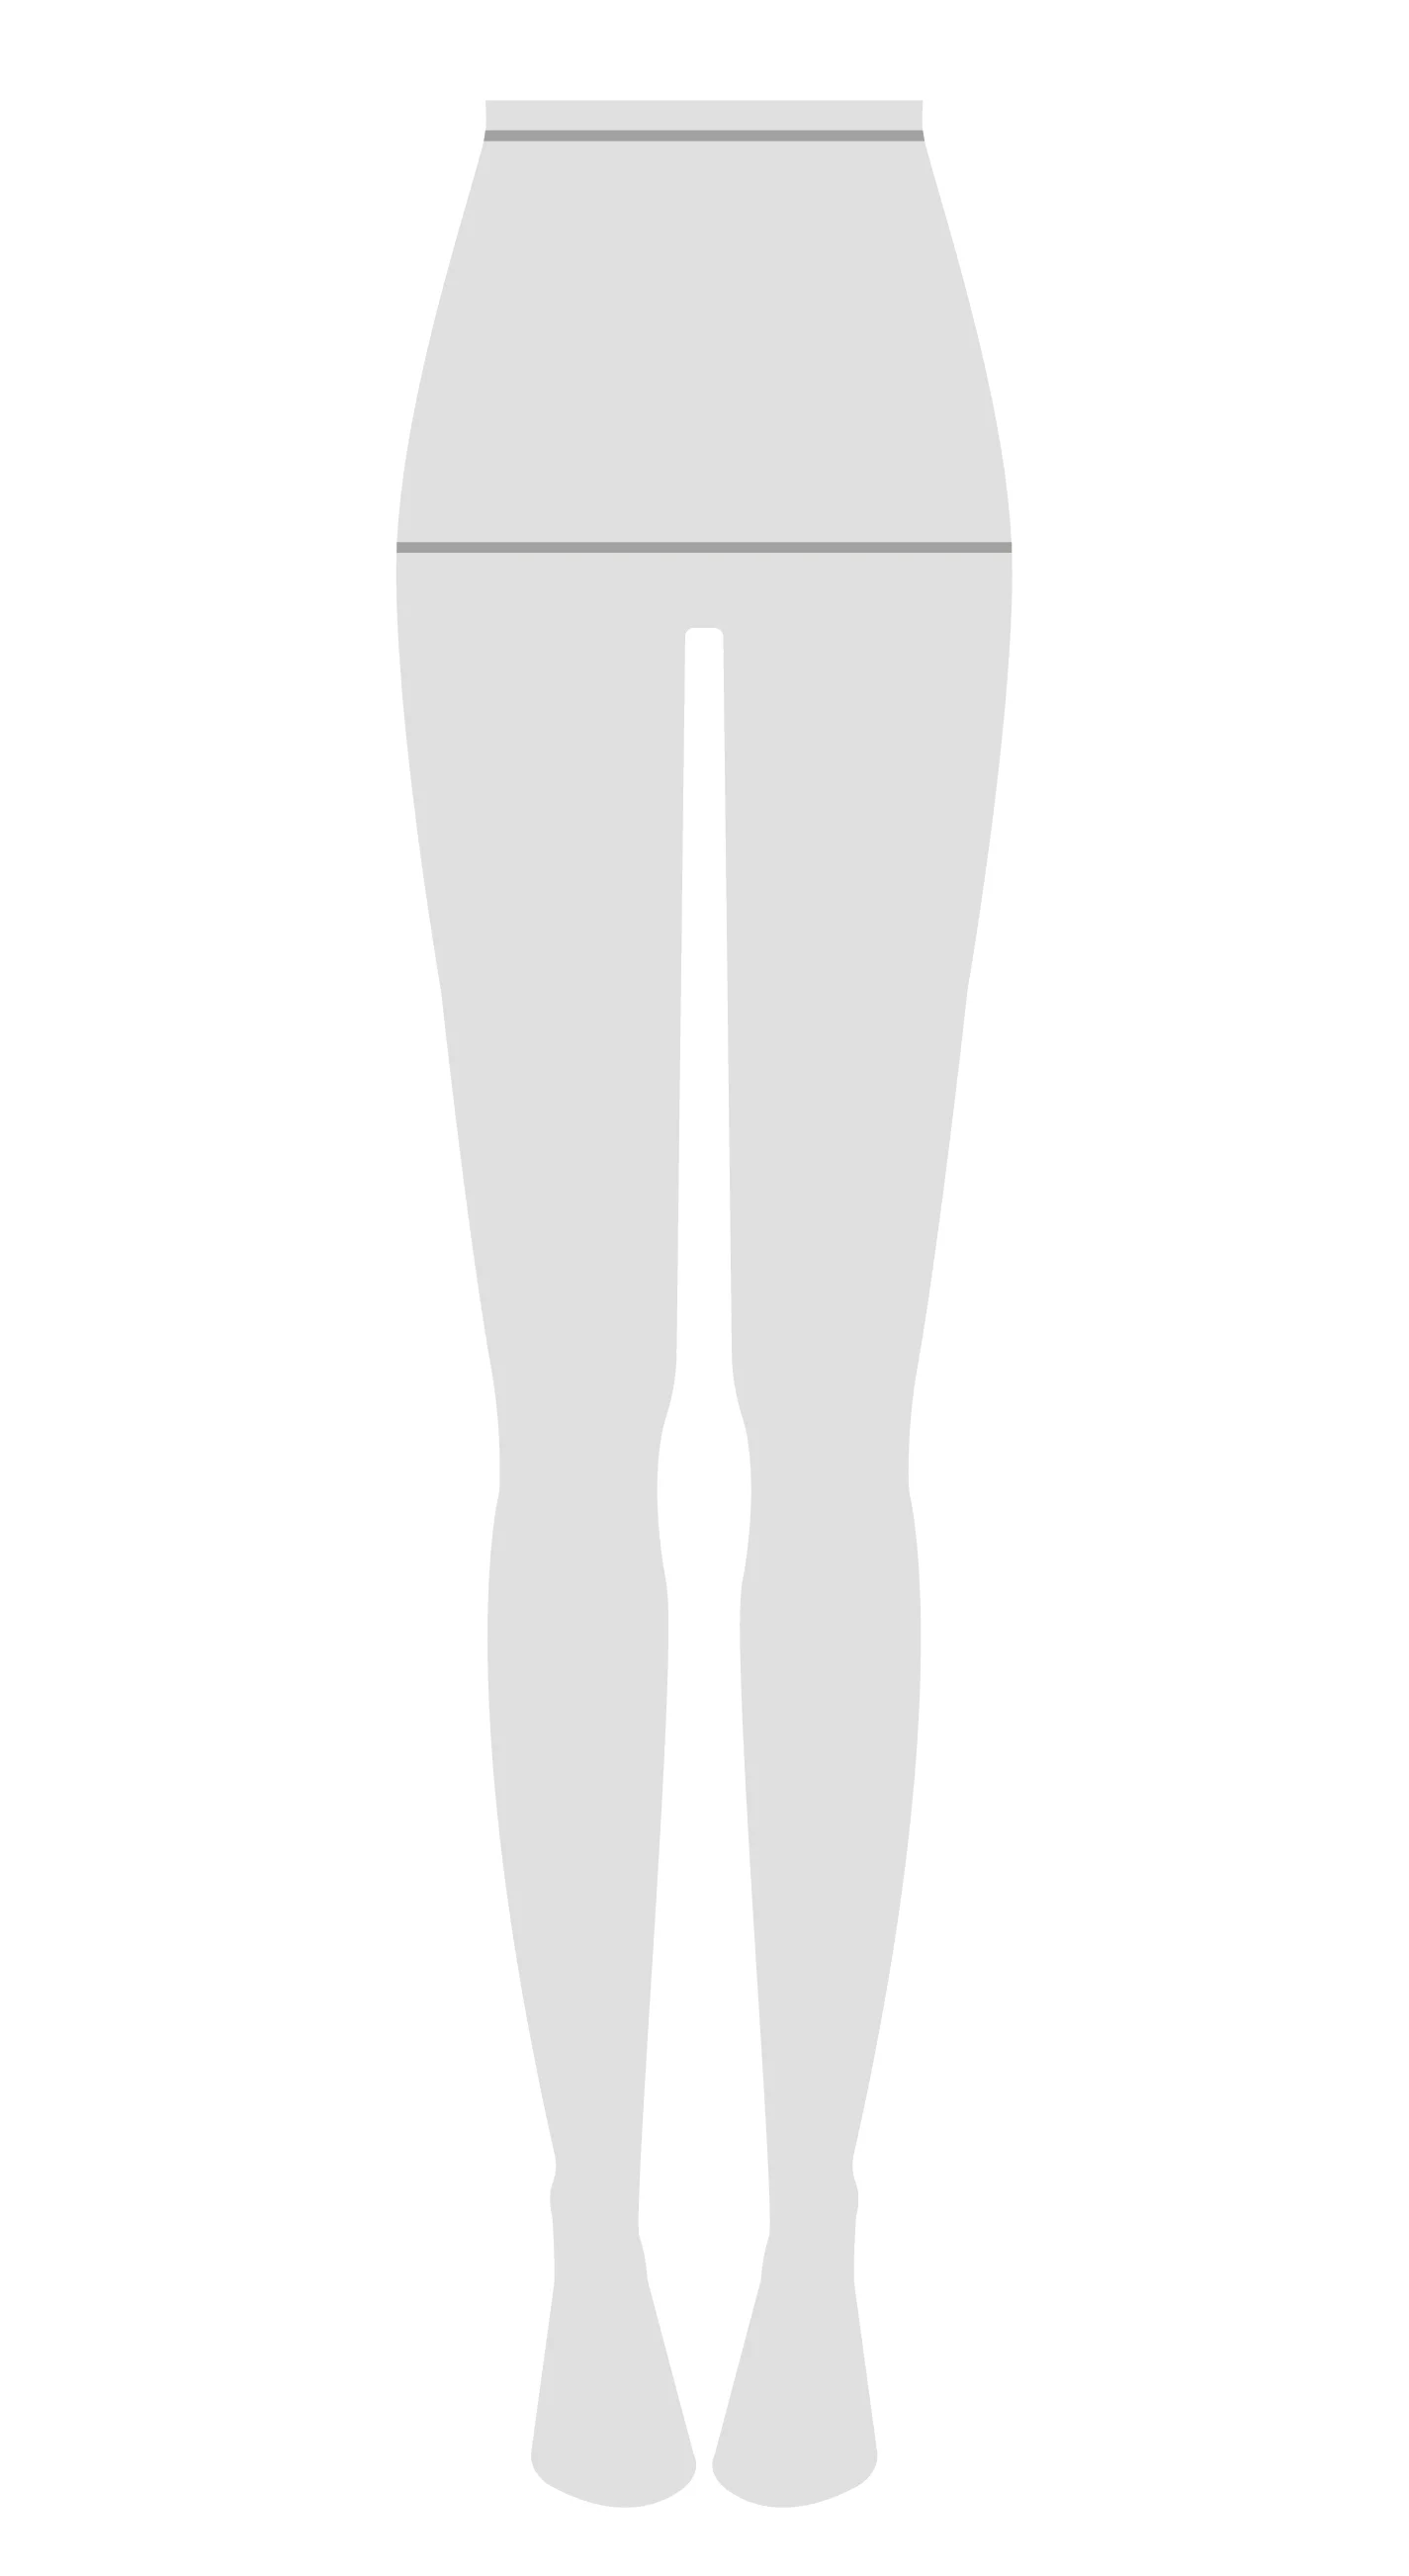 A silhouette of a mannequin with lines on the waist and hips indicating where to measure.